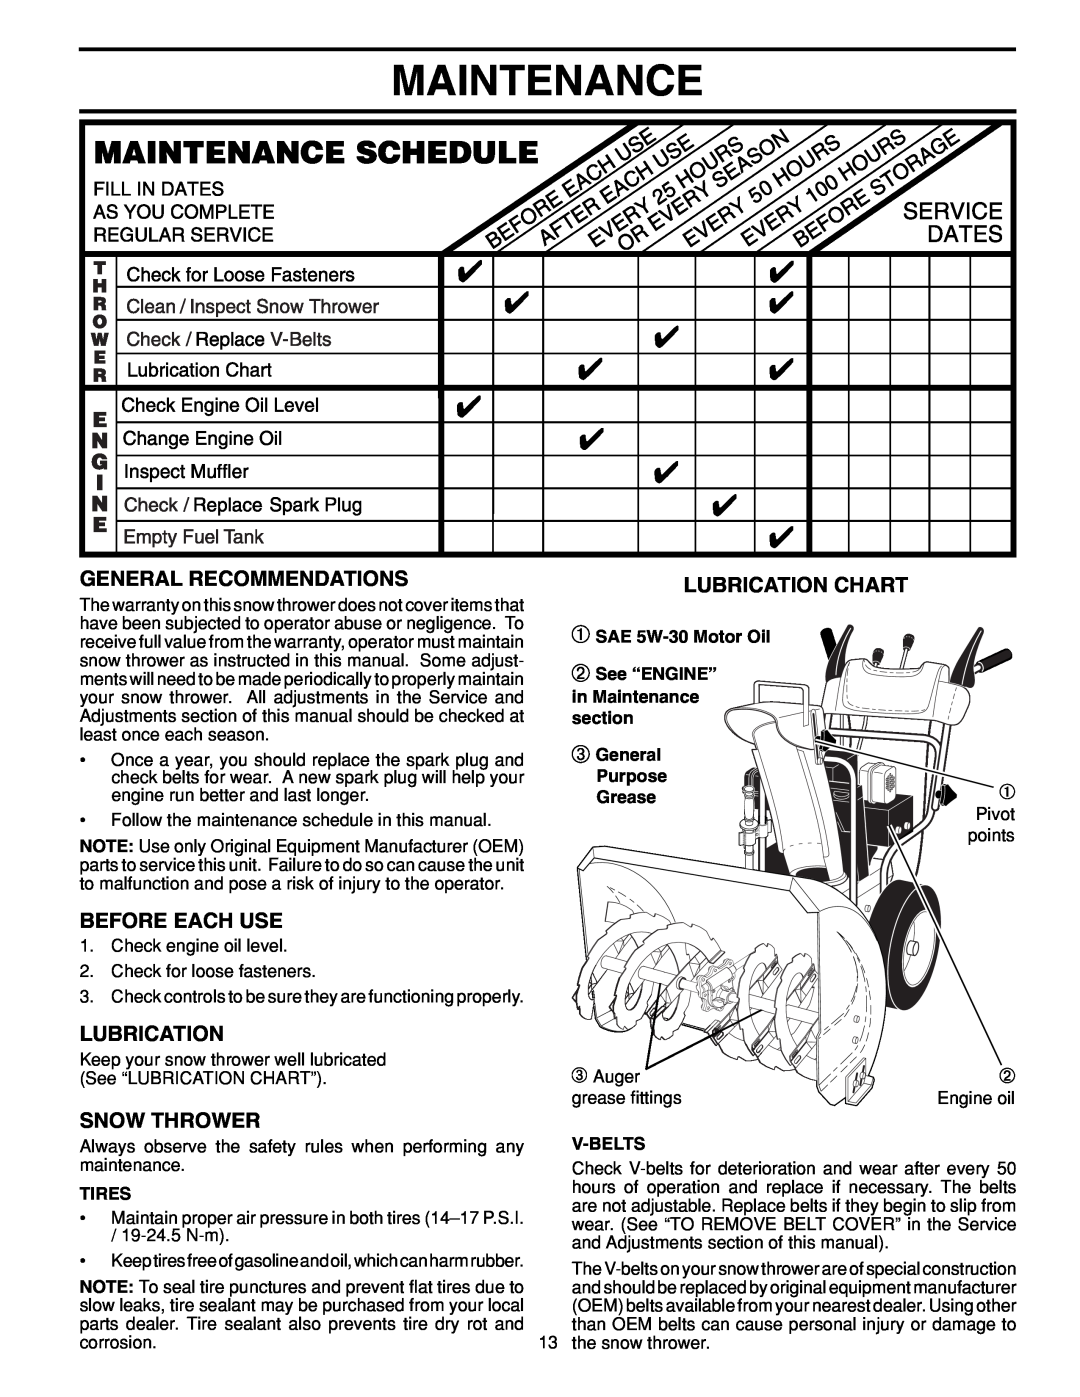 Poulan PP8527ES Maintenance, General Recommendations, Before Each Use, Lubrication Chart, Snow Thrower, Purpose Grease 